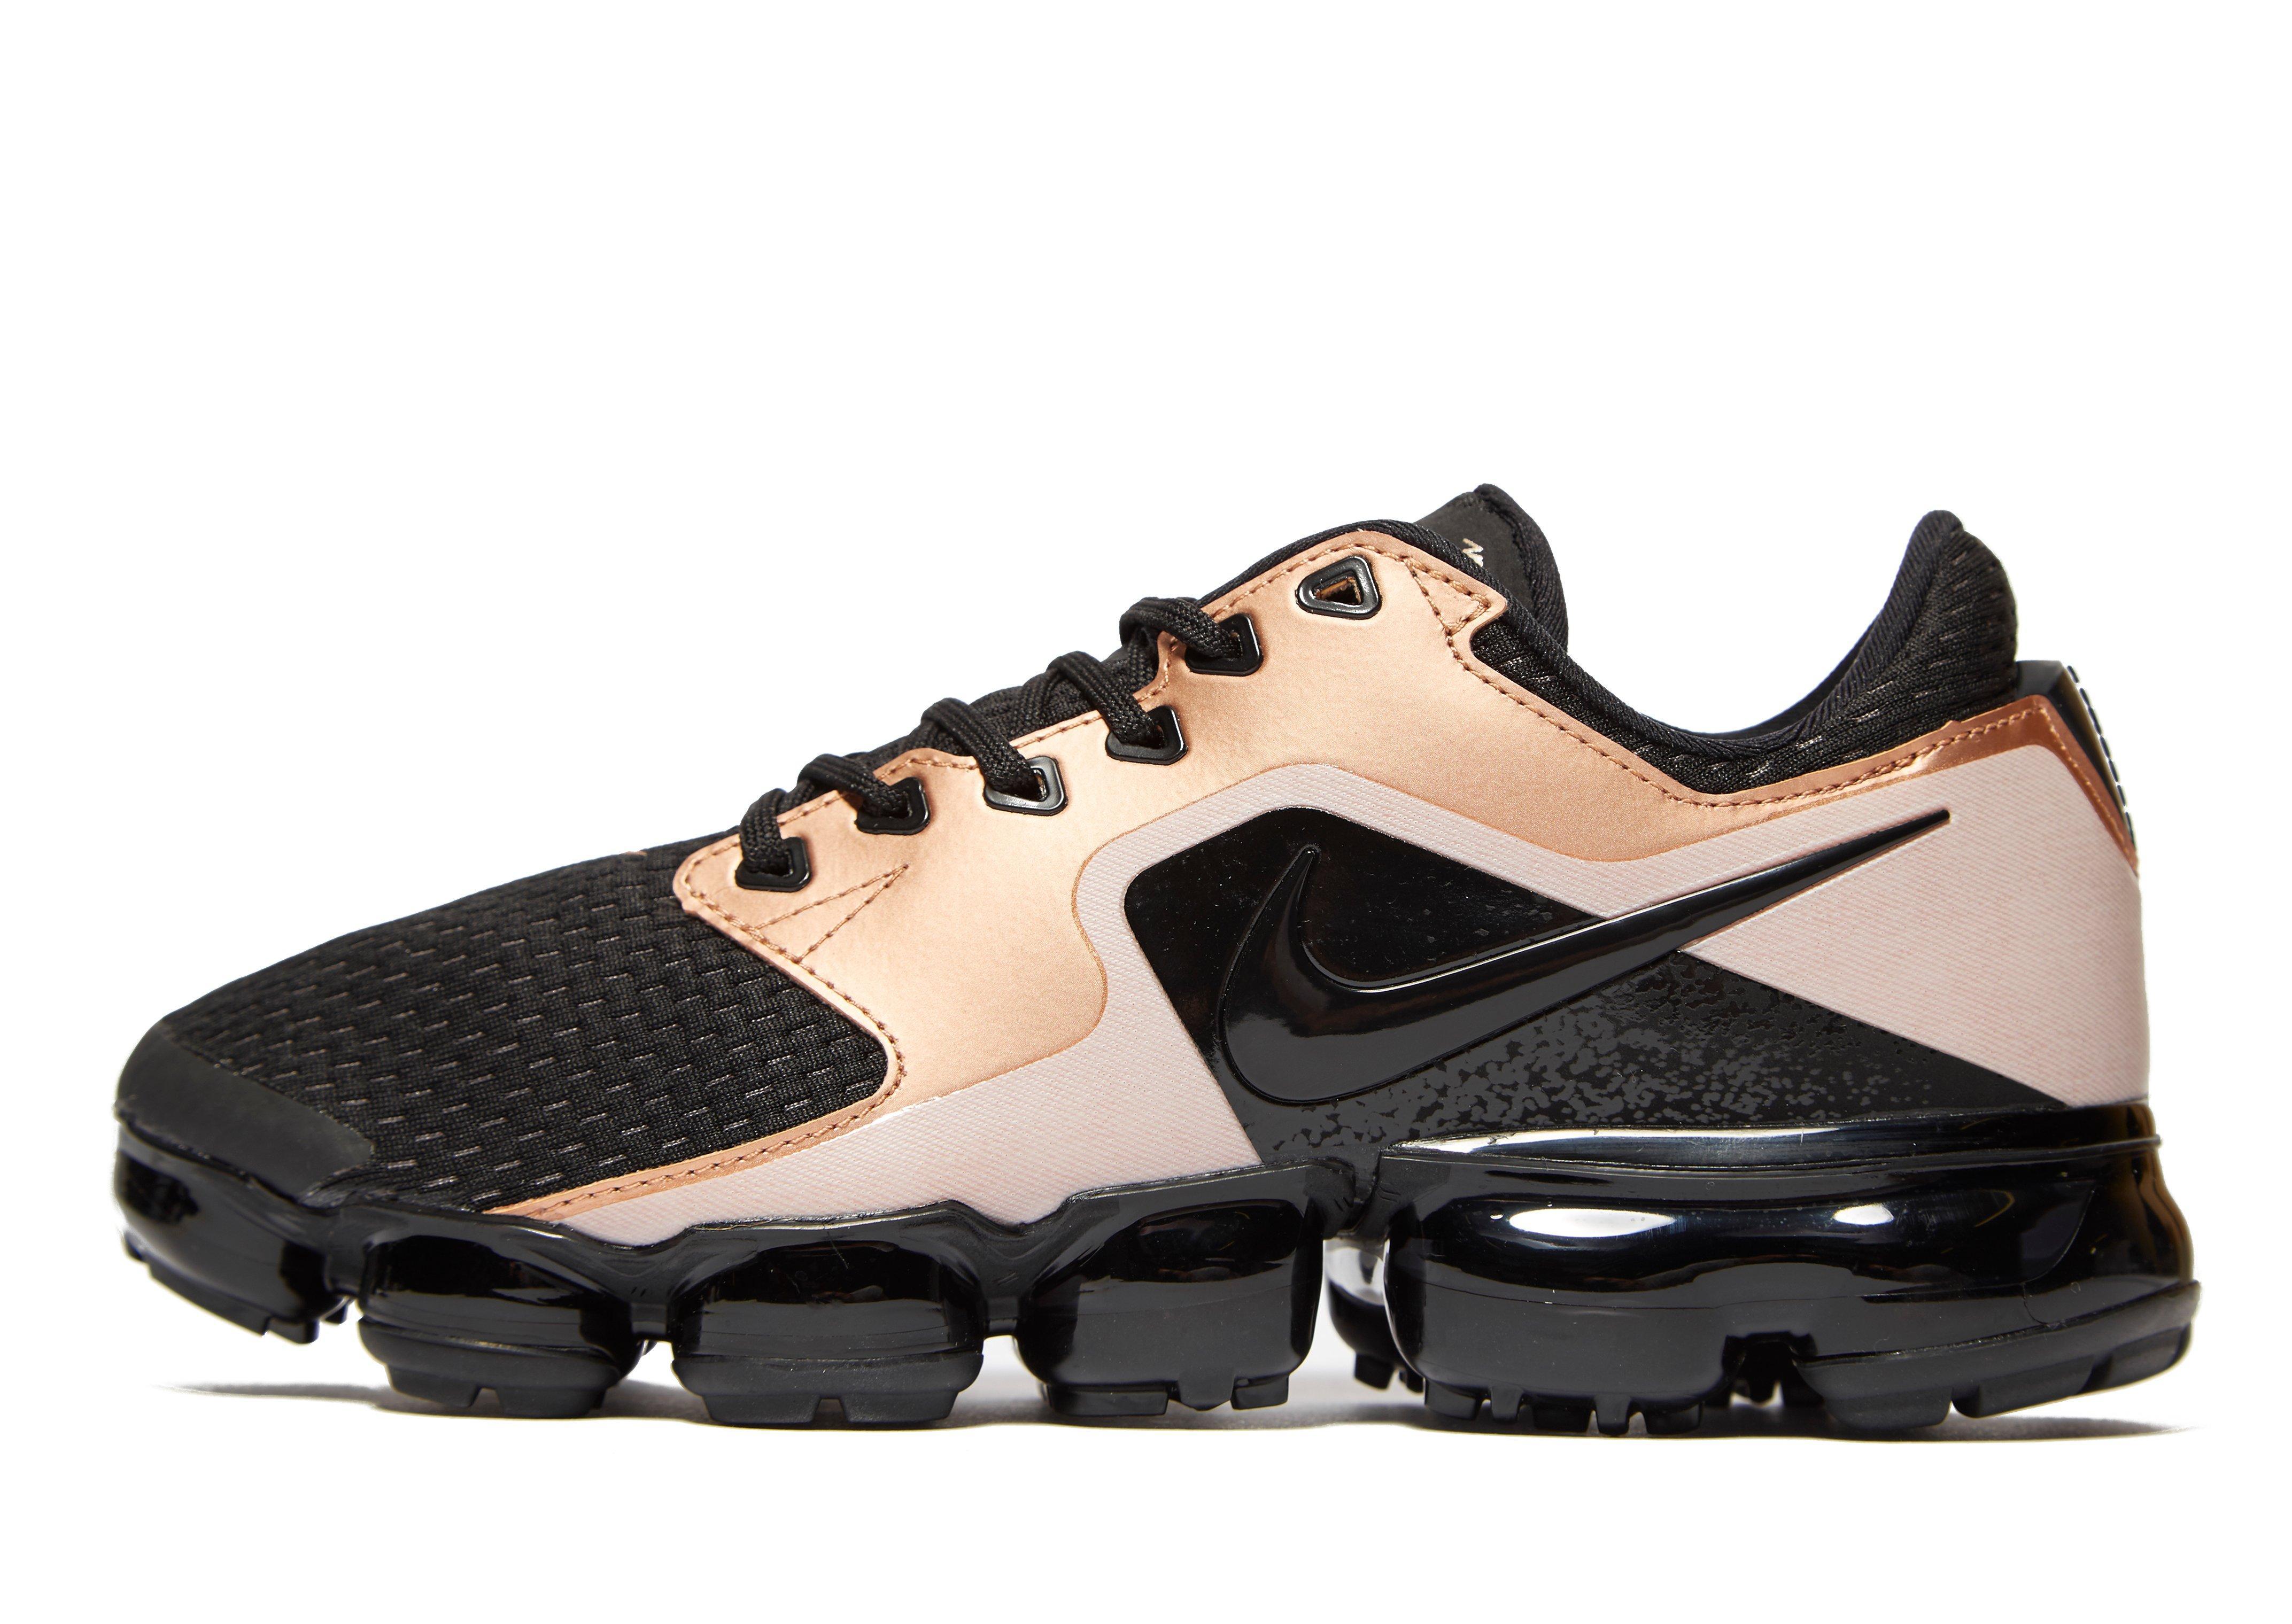 Nike Synthetic Air Vapormax Mesh in Black/Golden Pink (Black) - Lyst